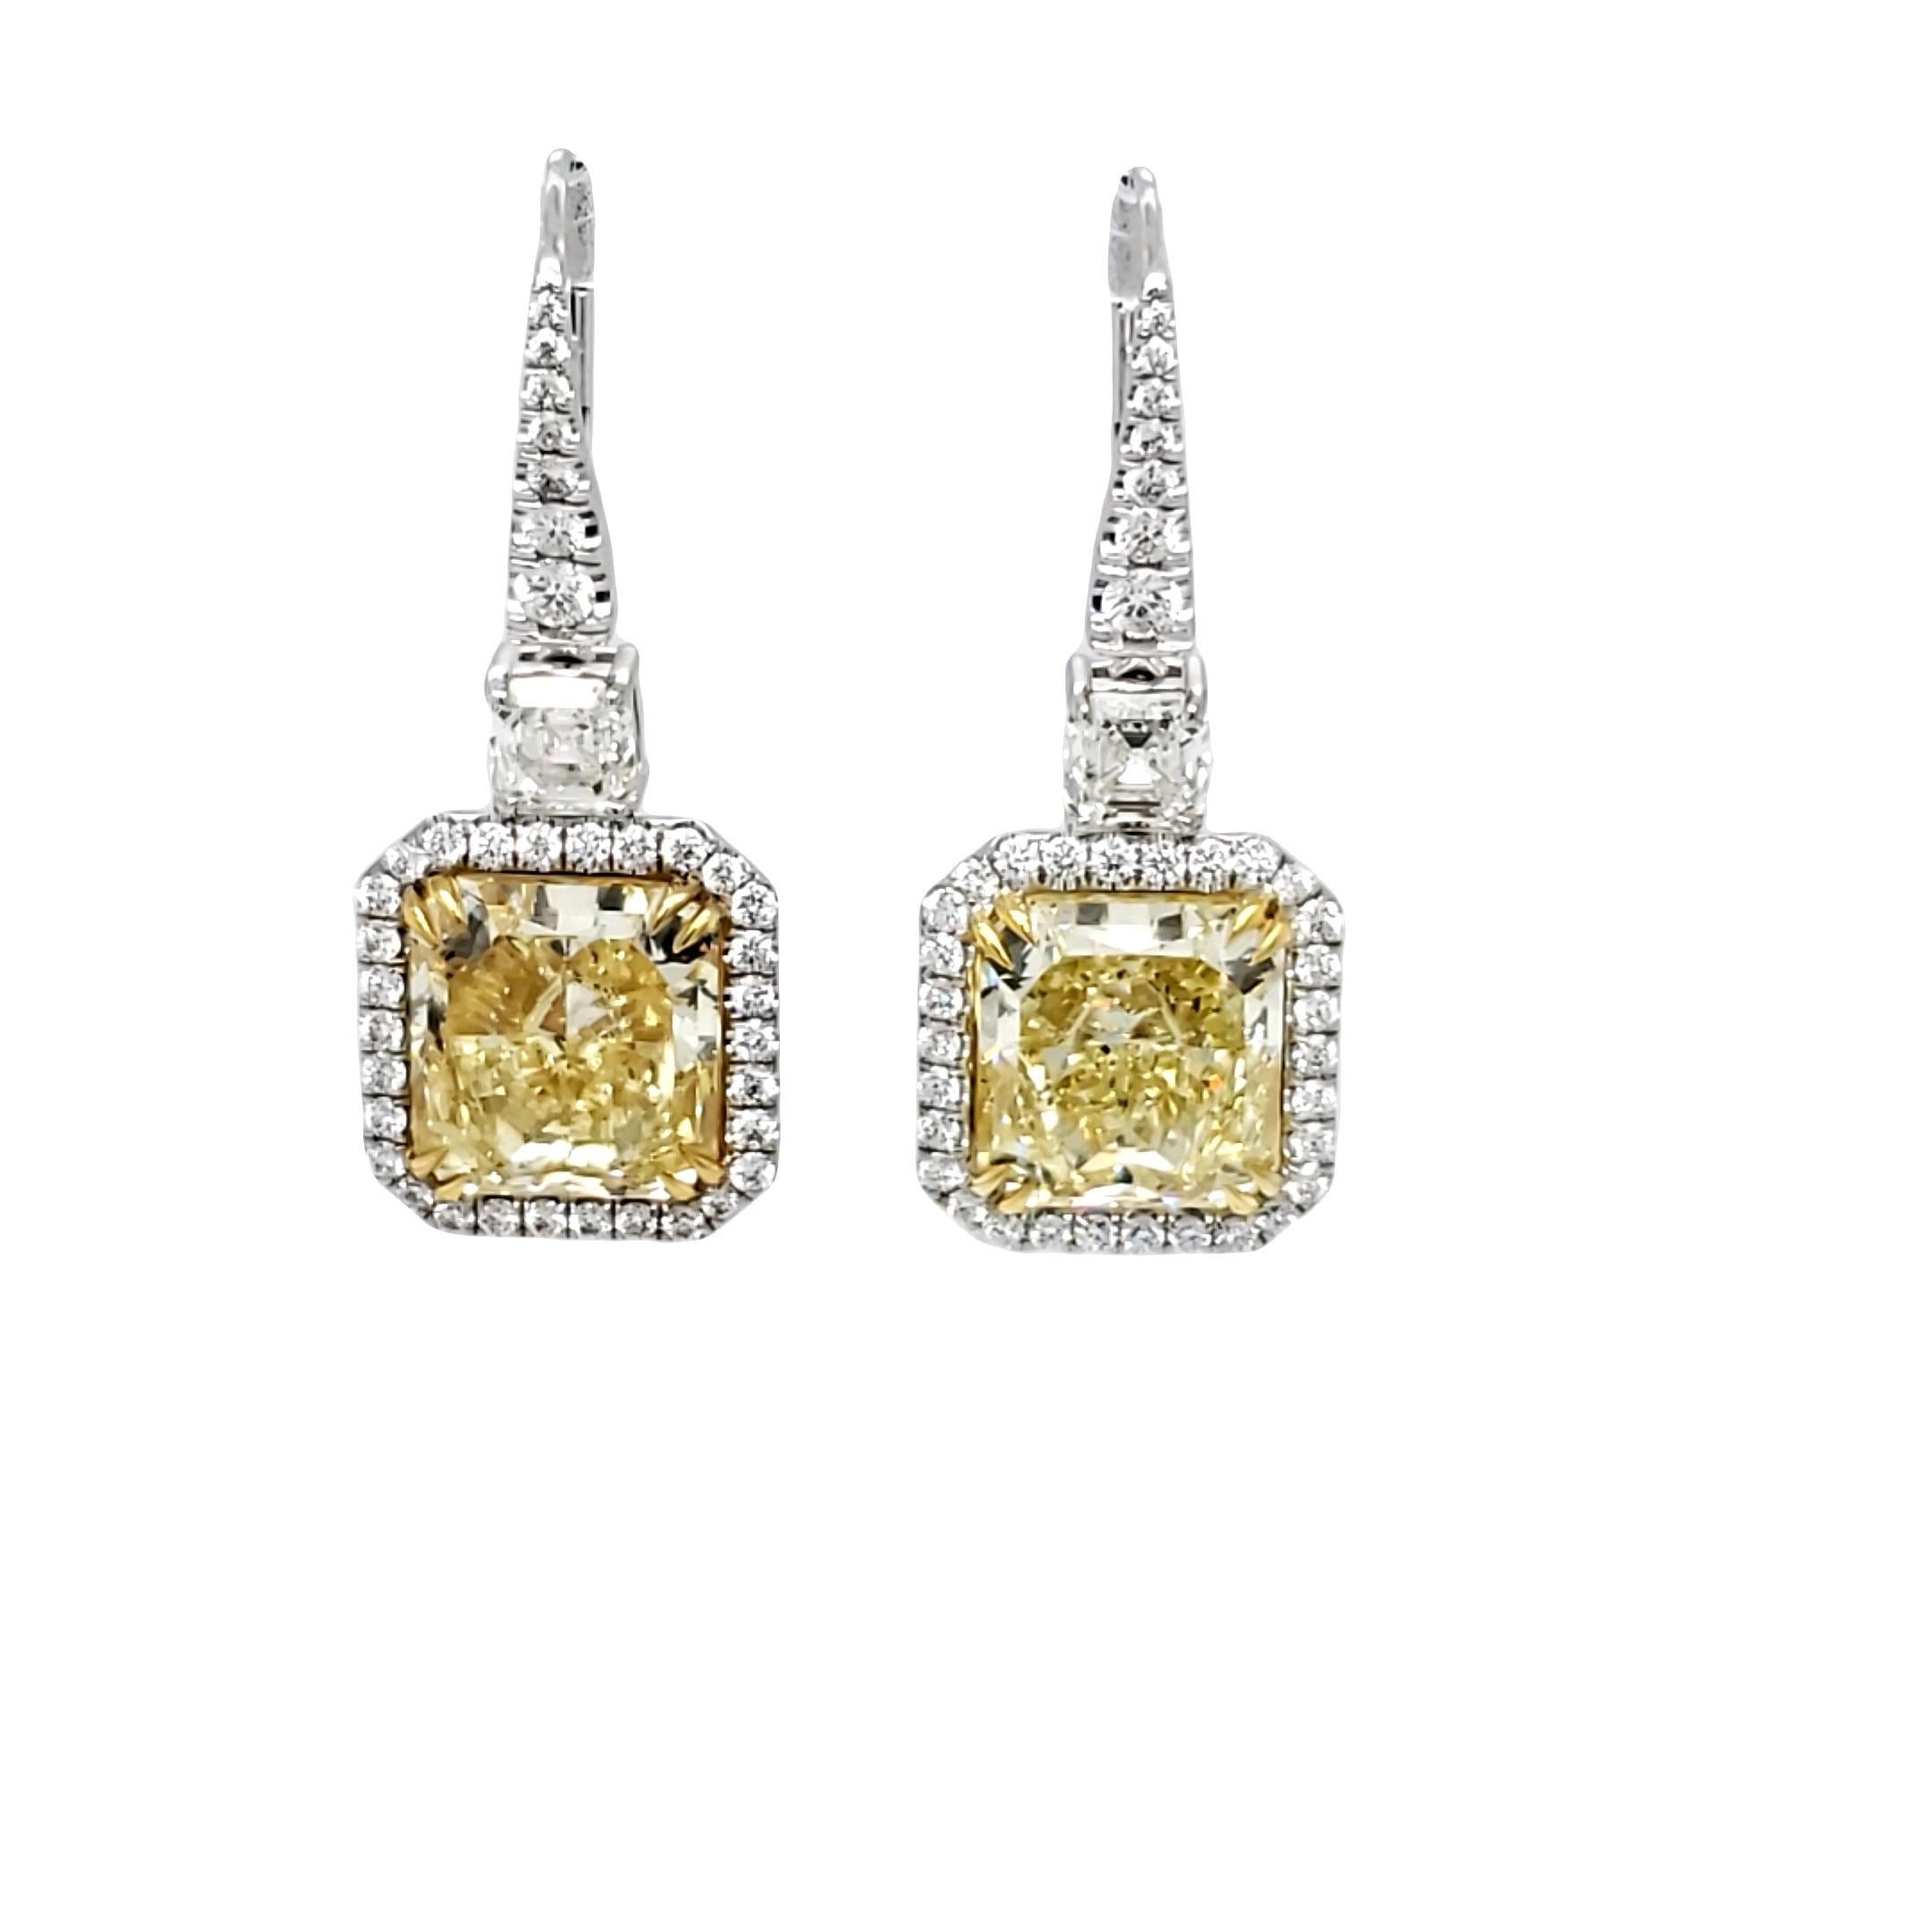 A beautifully matched 9.68tw Radiant Fancy Yellow VVS2 clarity diamond earrings are GIA Certified. These gorgeous light weight dangling earrings set in 18k white and yellow gold also features a matched pair of 1.03 carat total weight of Asscher